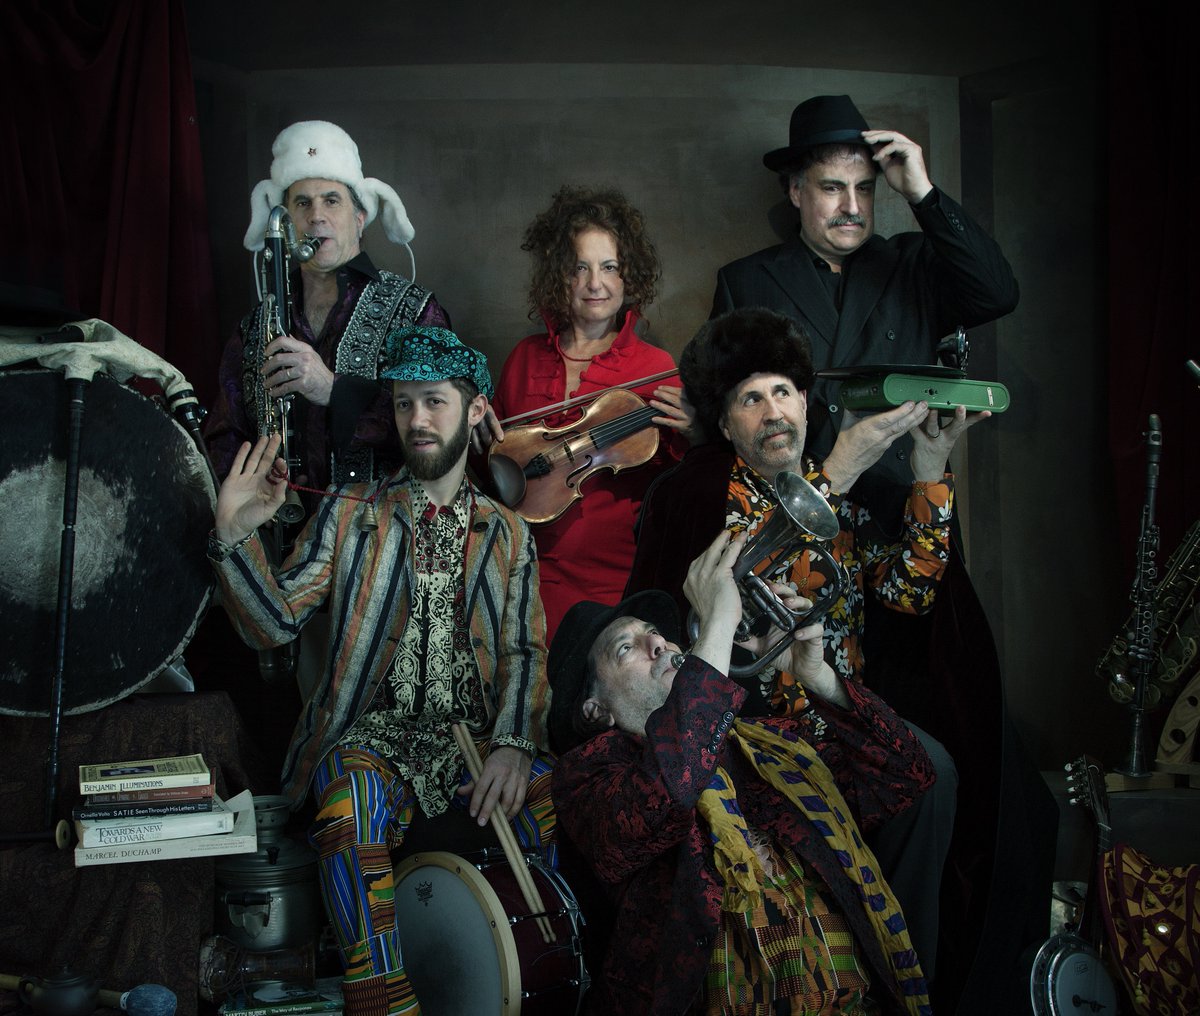 The Klezmatics, world-renowned klezmer performers from New York City’s East Village, are coming to the Cornell Concert Series: Saturday, April 13 at 7:30 pm in Bailey Hall. as.cornell.edu/news/klezmatic…